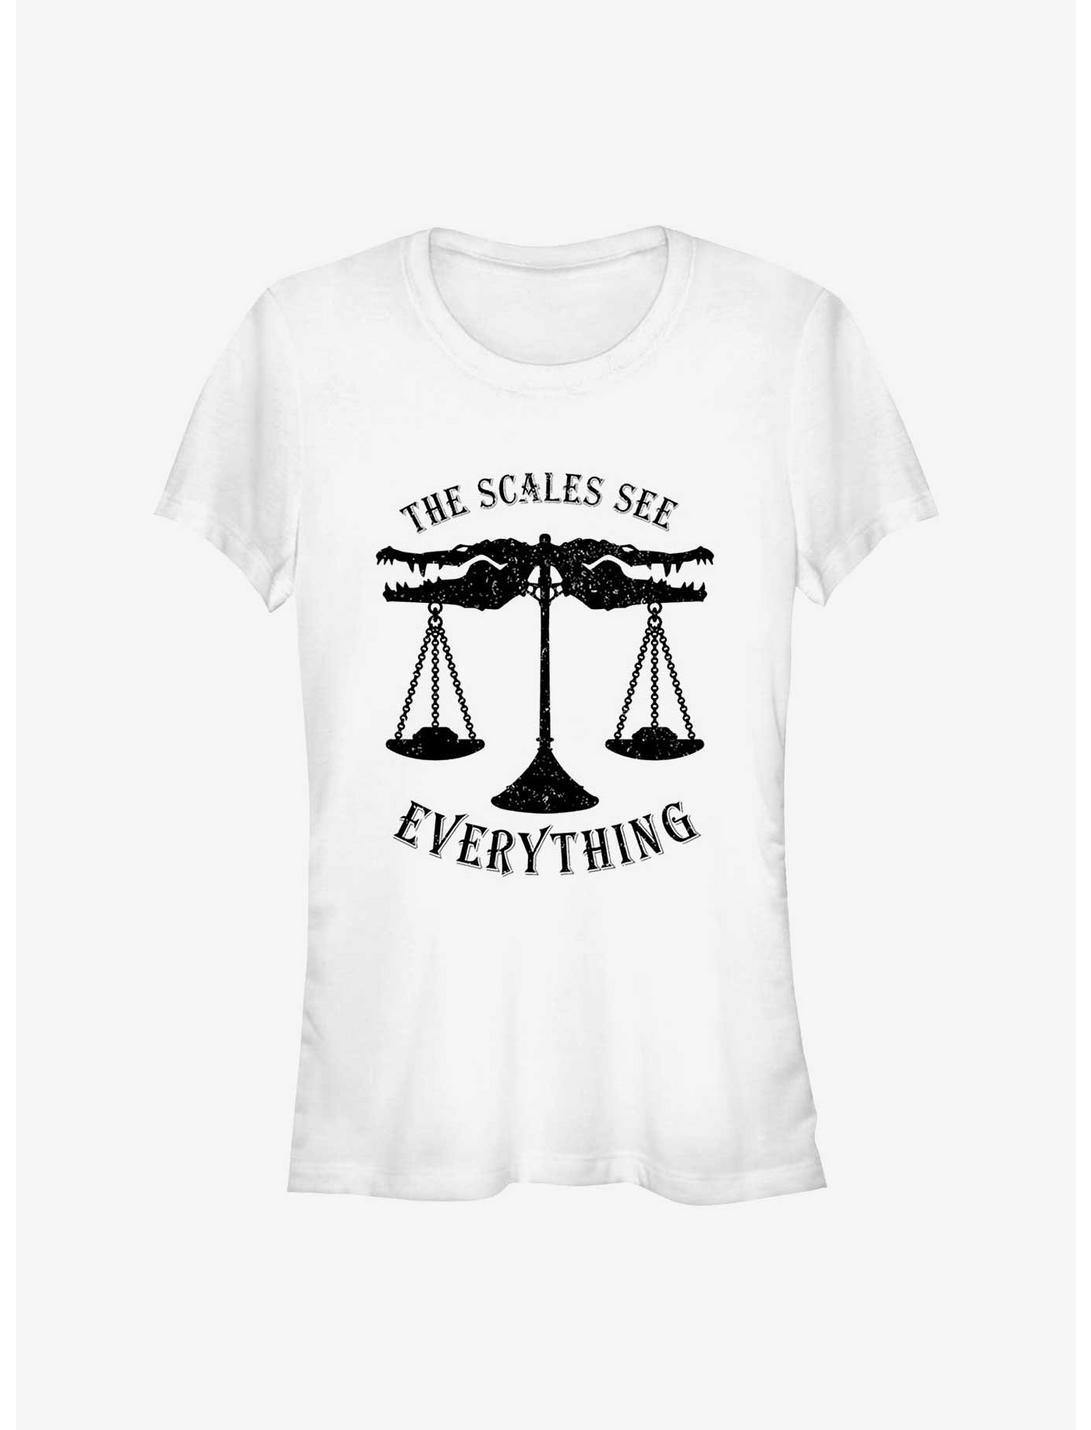 Marvel Moon Knight Scales See Everything Girls T-Shirt, WHITE, hi-res